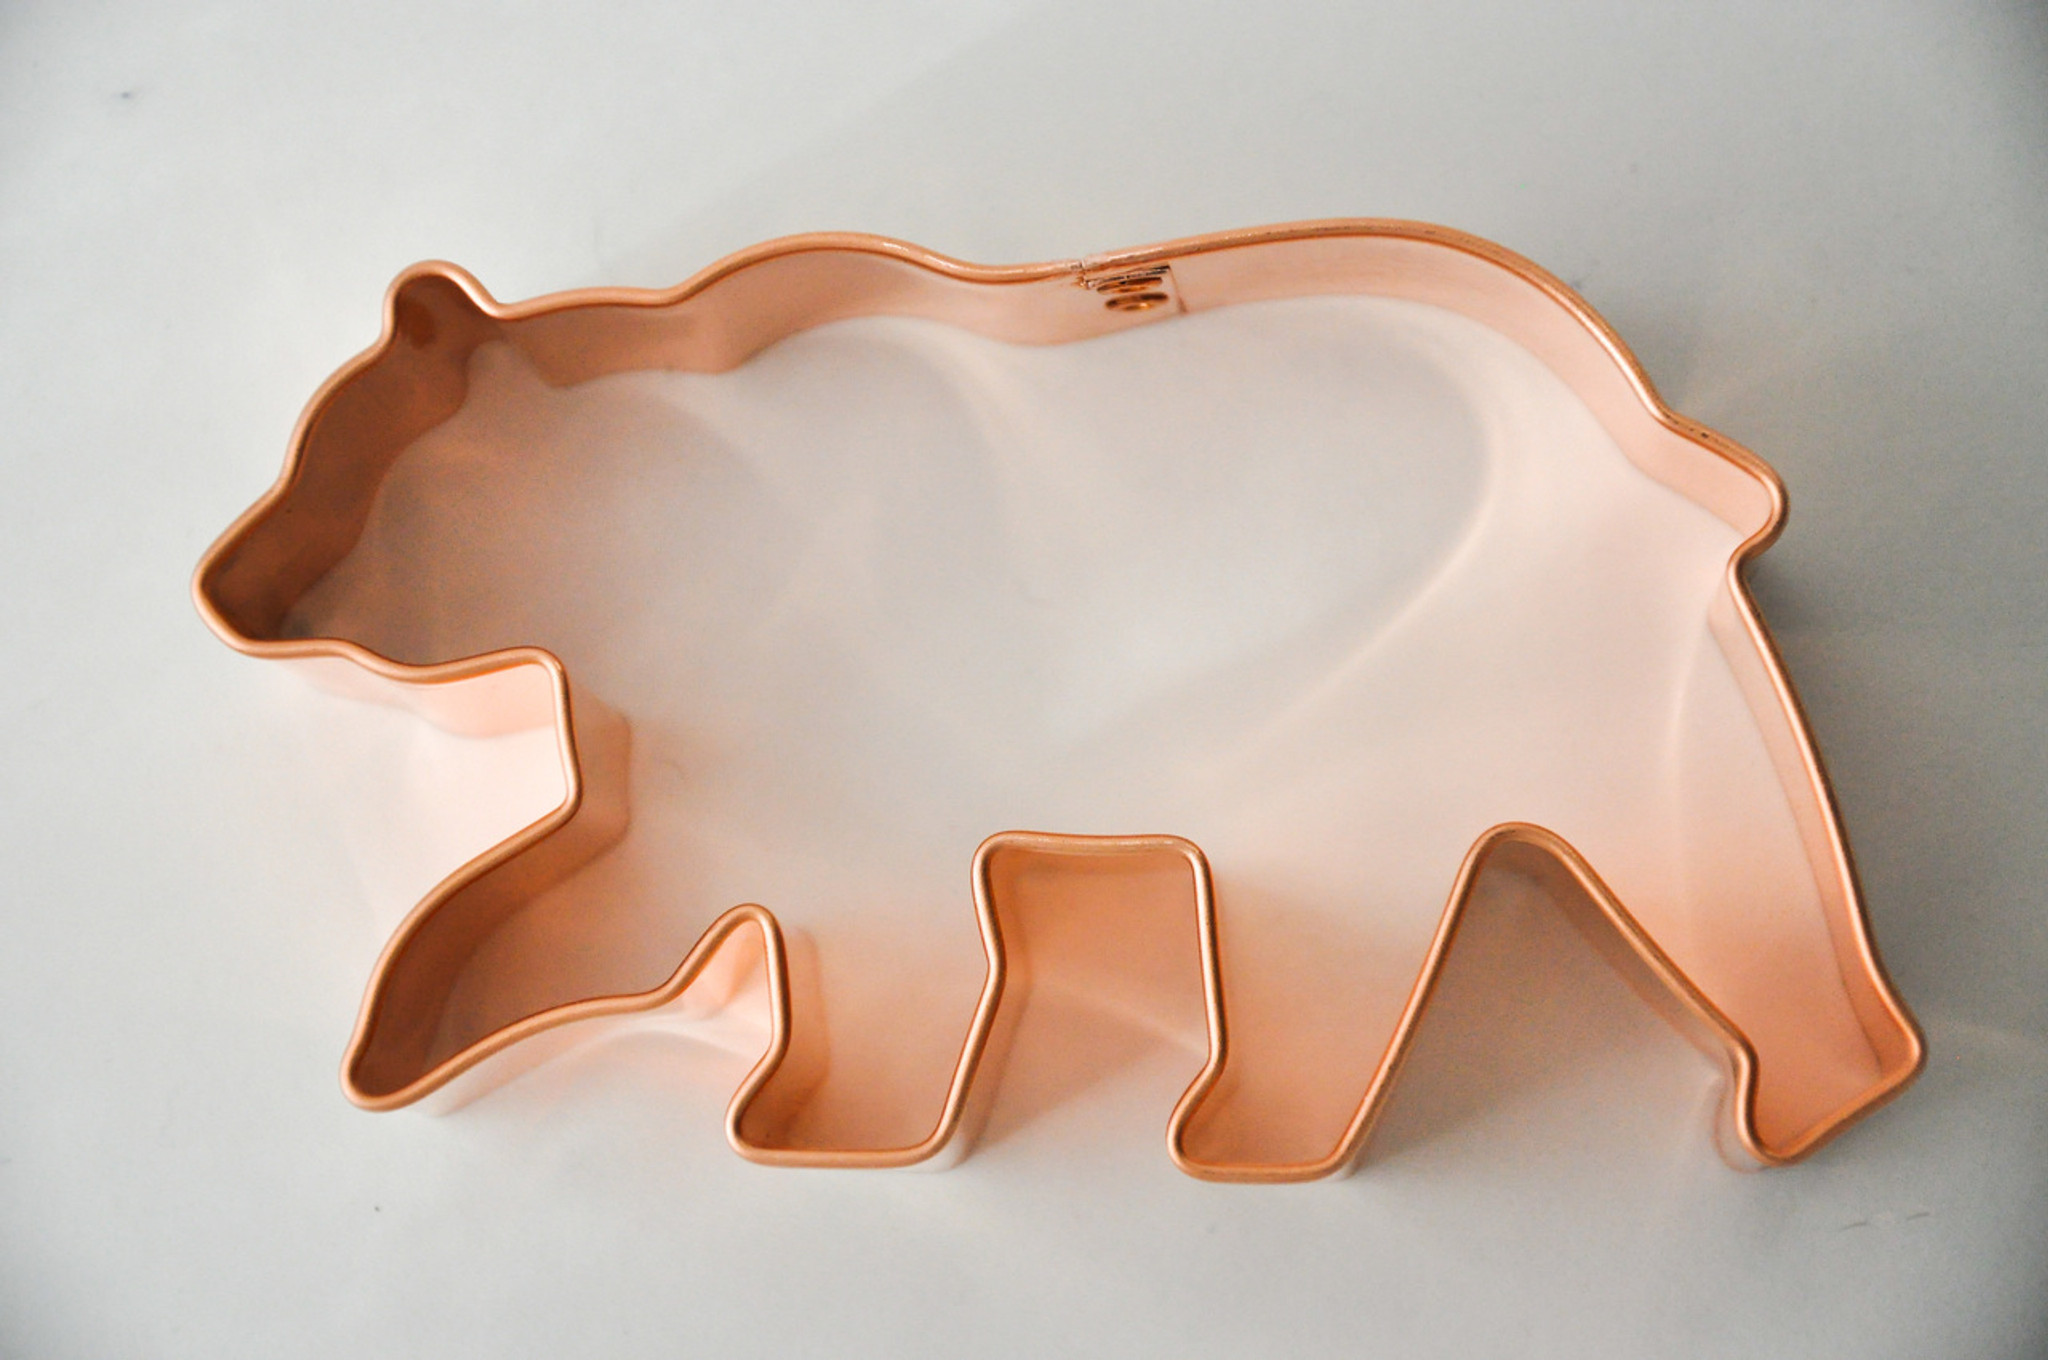 Grizzly Bear Cookie Cutter 